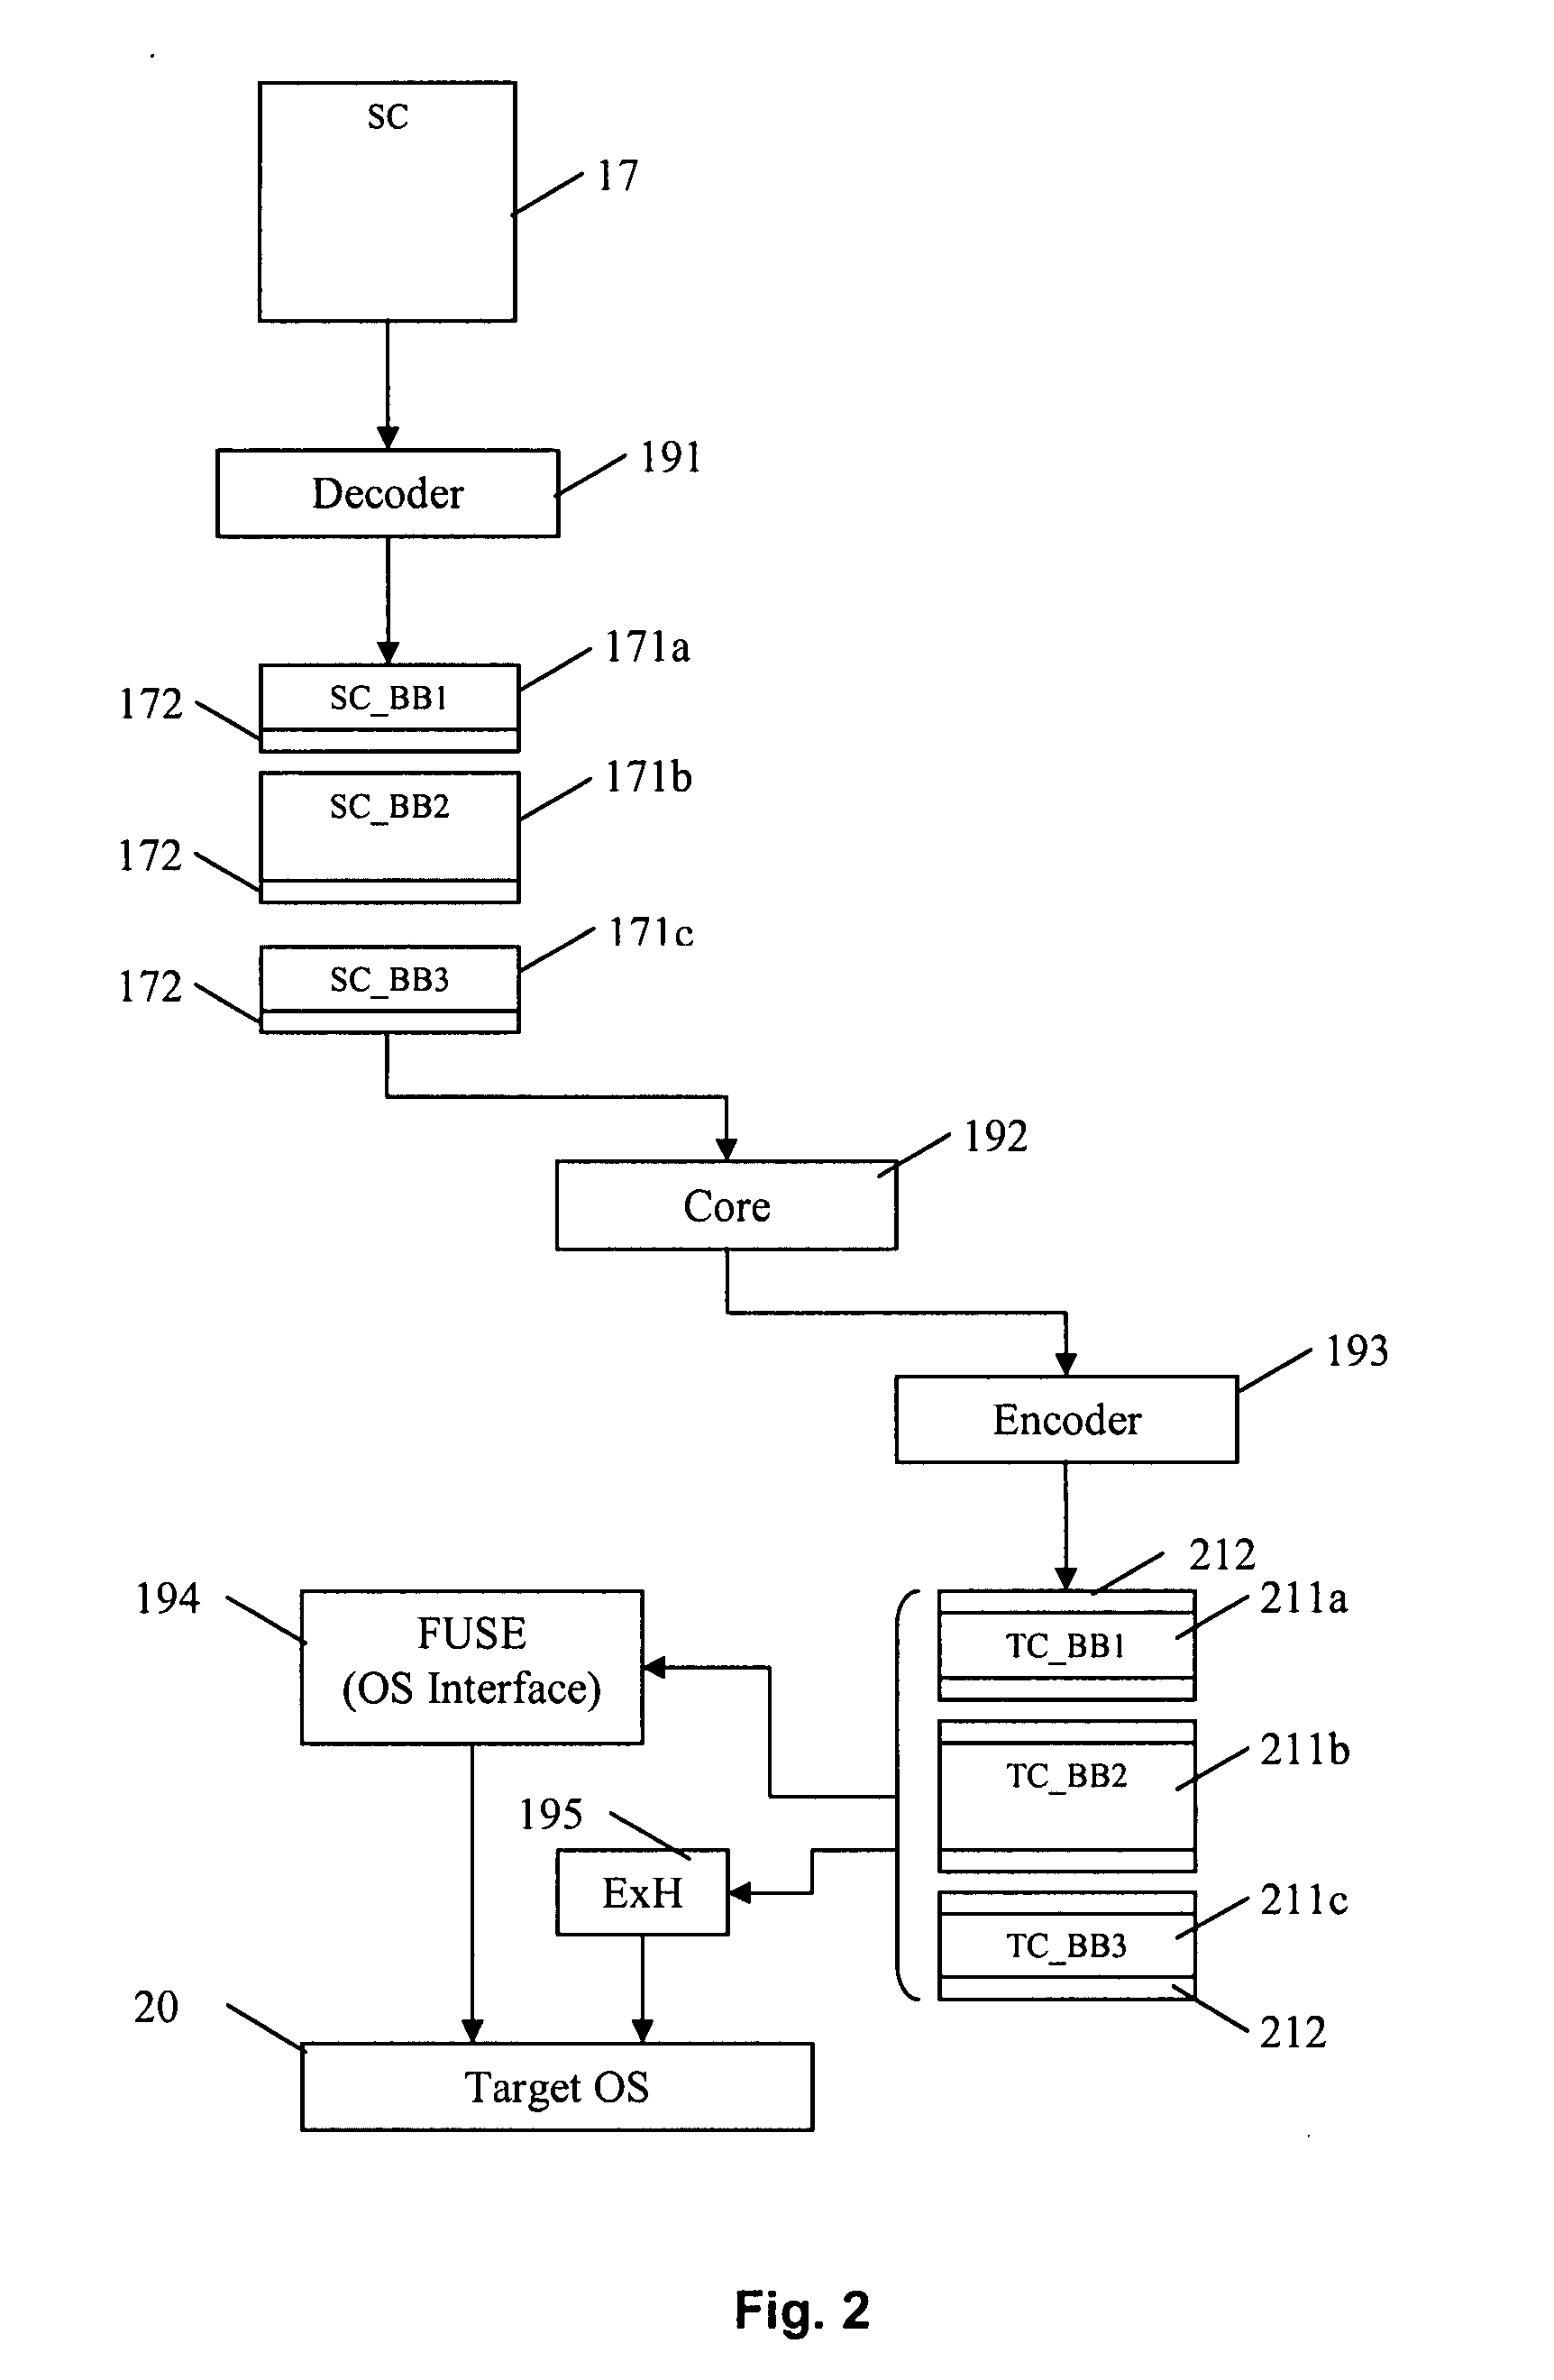 Memory consistency protection in a multiprocessor computing system